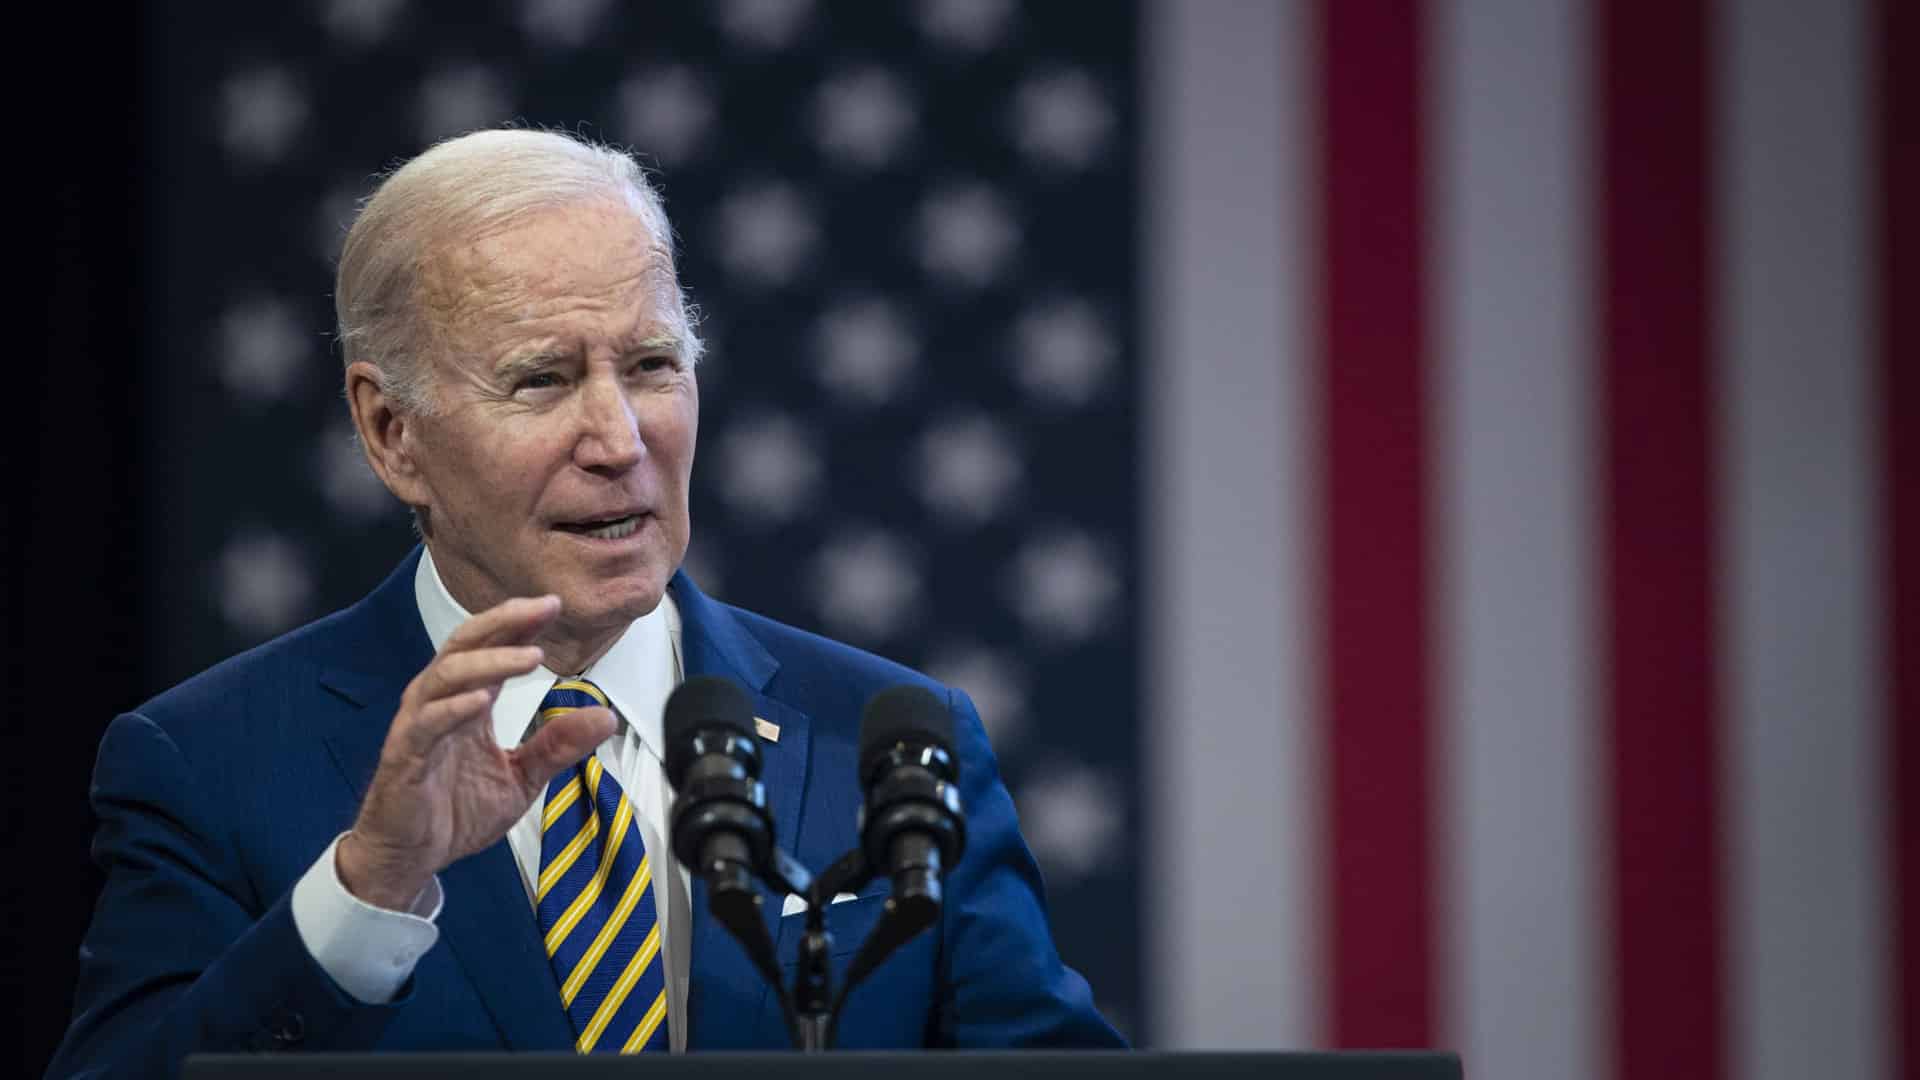 Biden appoints two Indian-Americans to Advisory Committee for Trade Policy and Negotiations